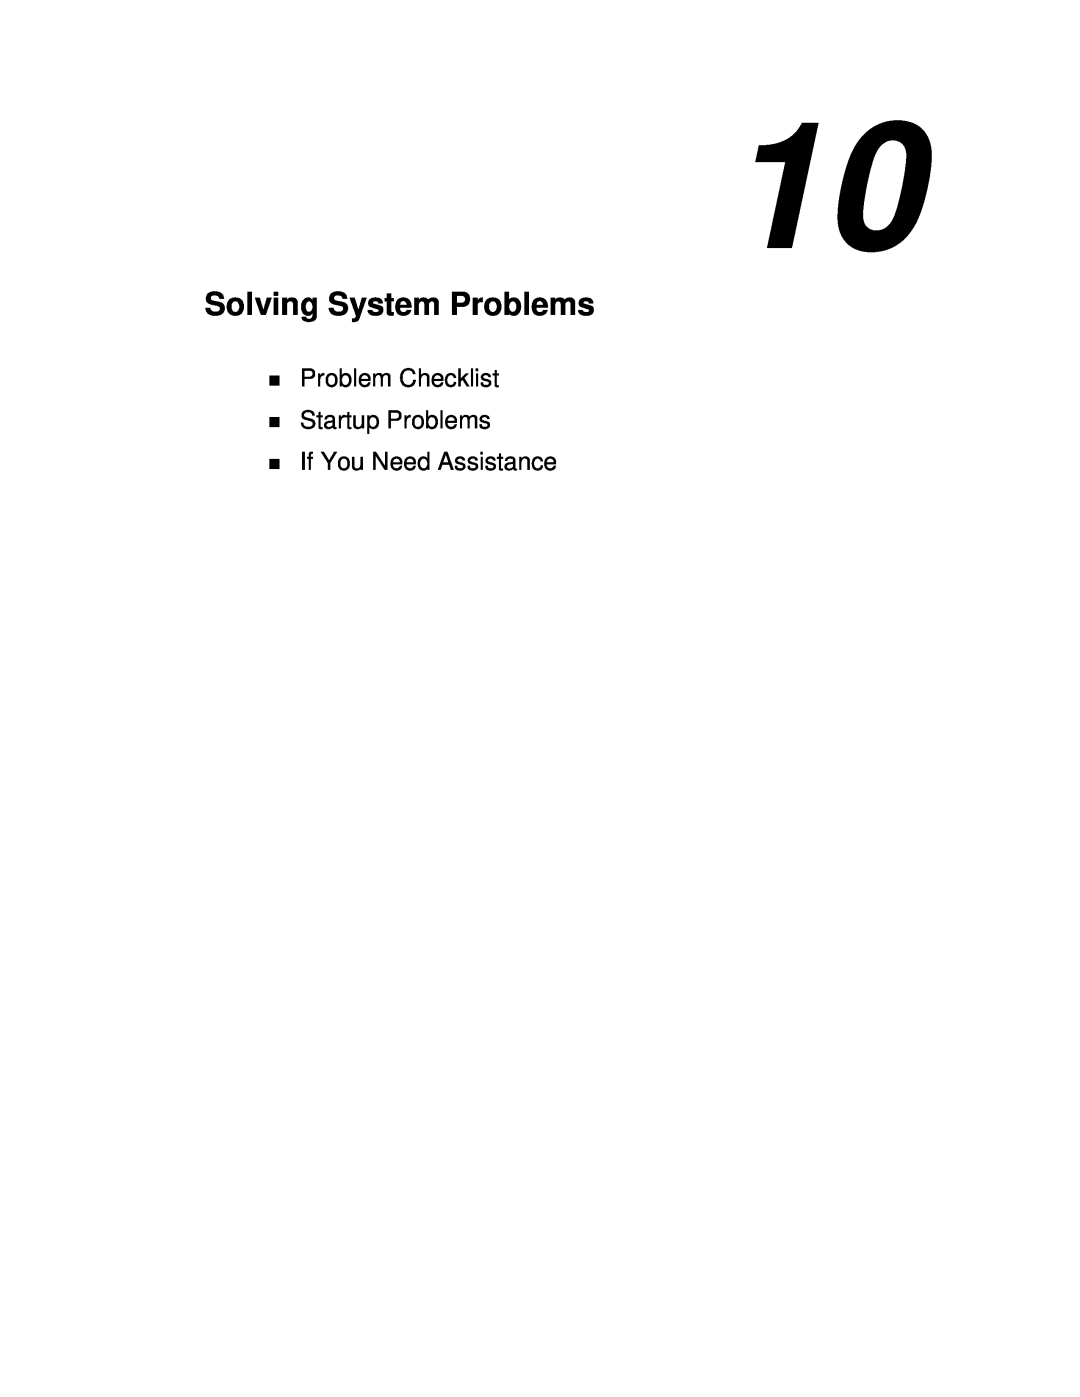 NEC VX manual Solving System Problems, Problem Checklist Startup Problems If You Need Assistance 